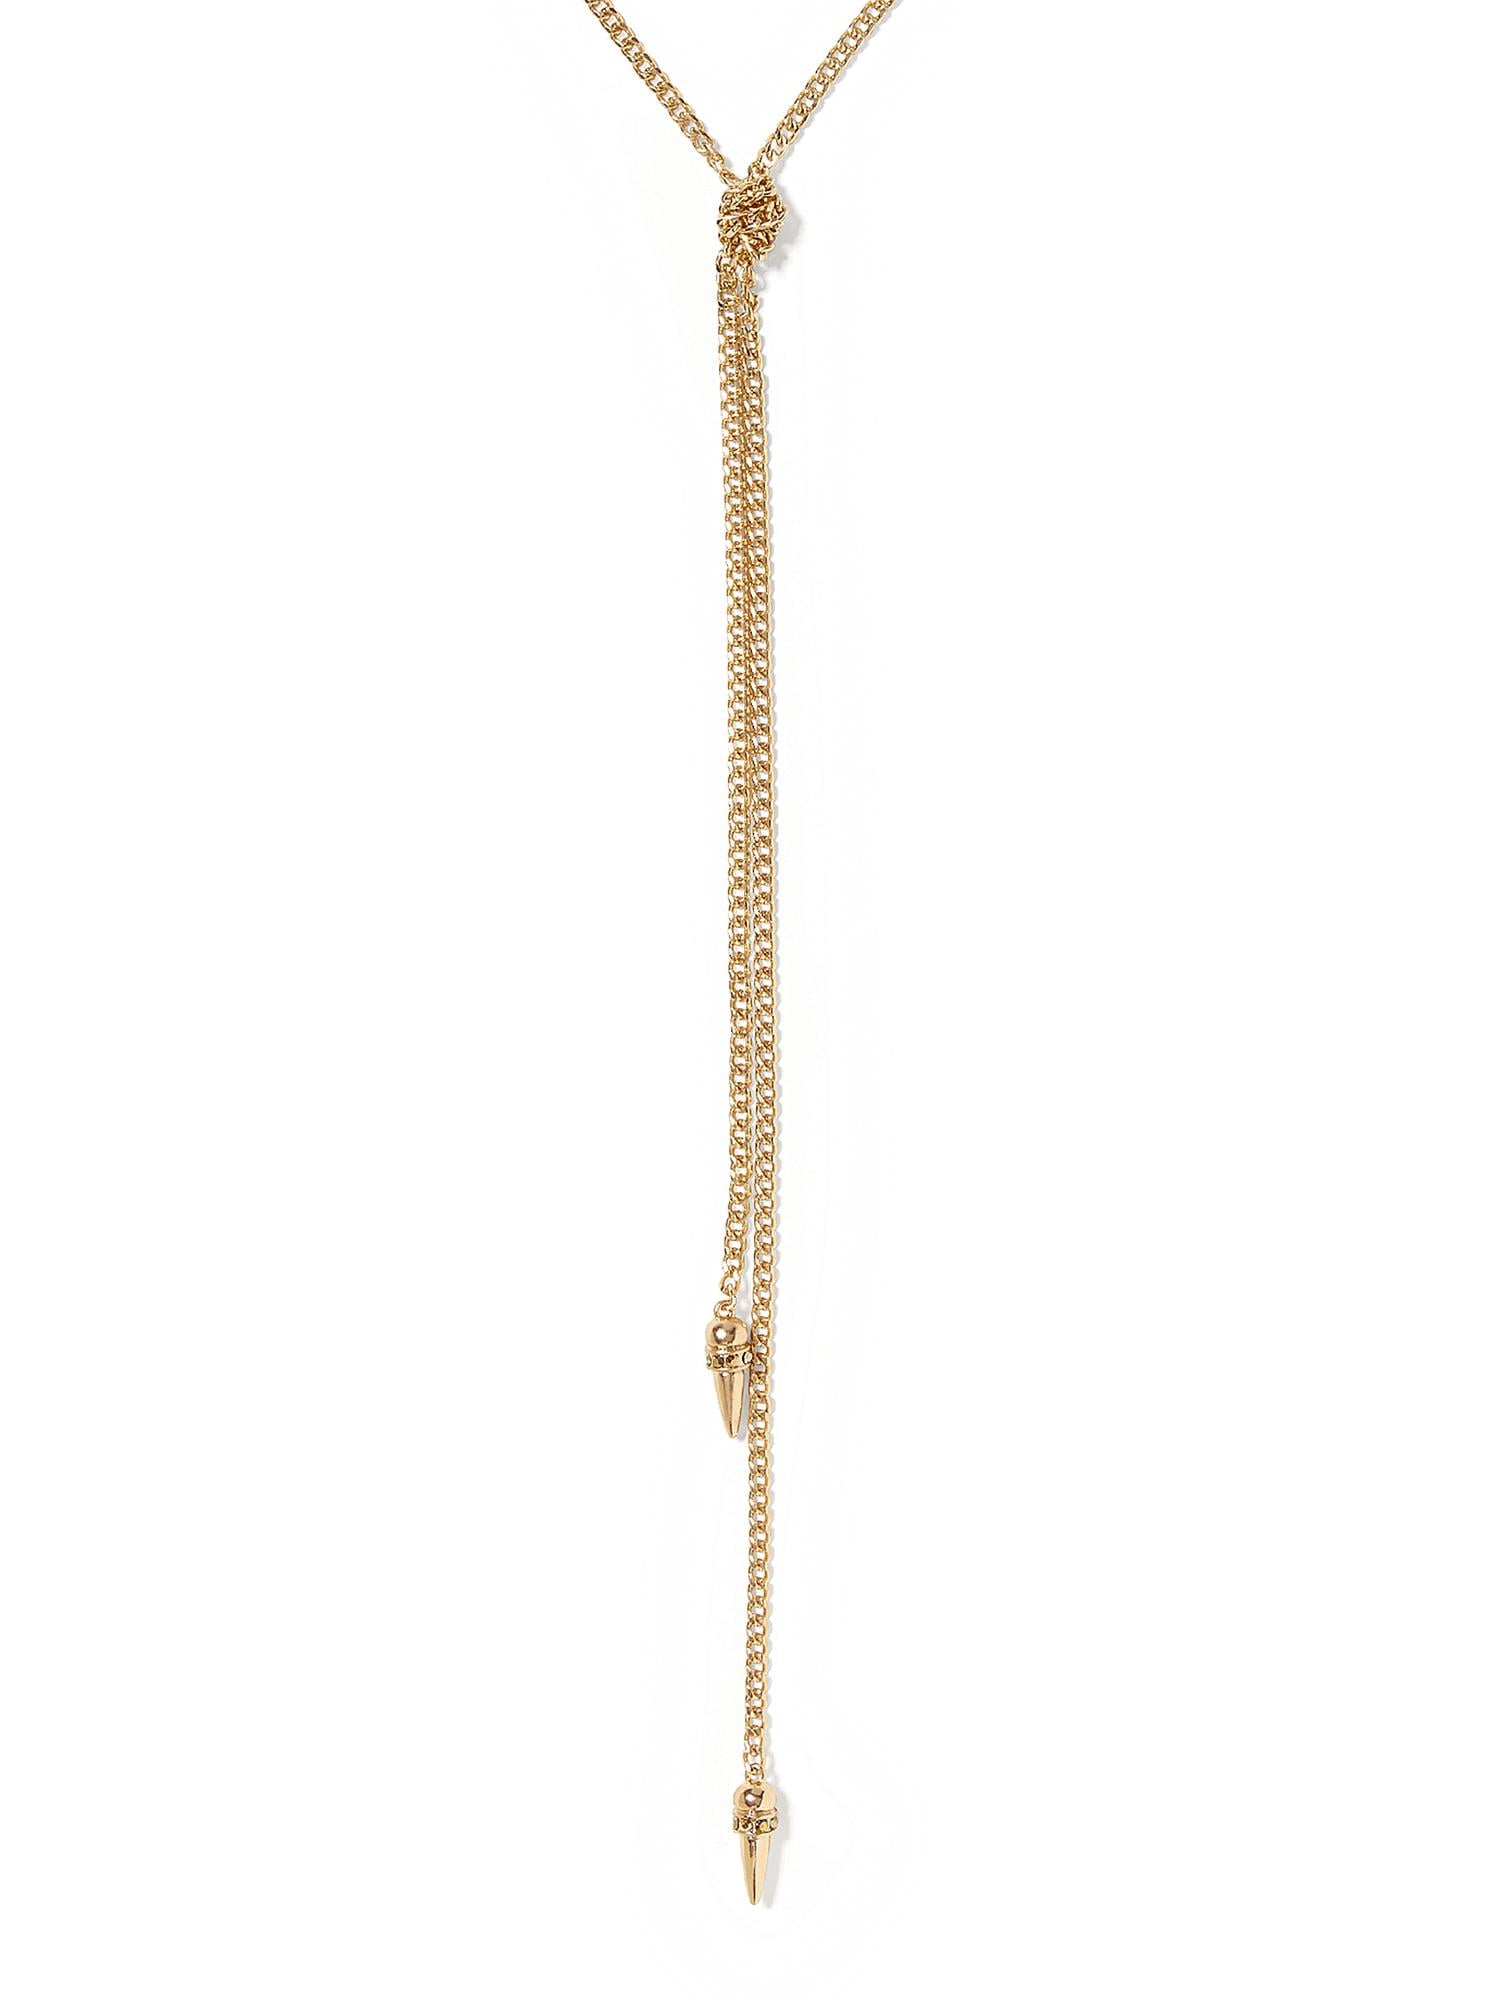 Gilded Lariat Necklace